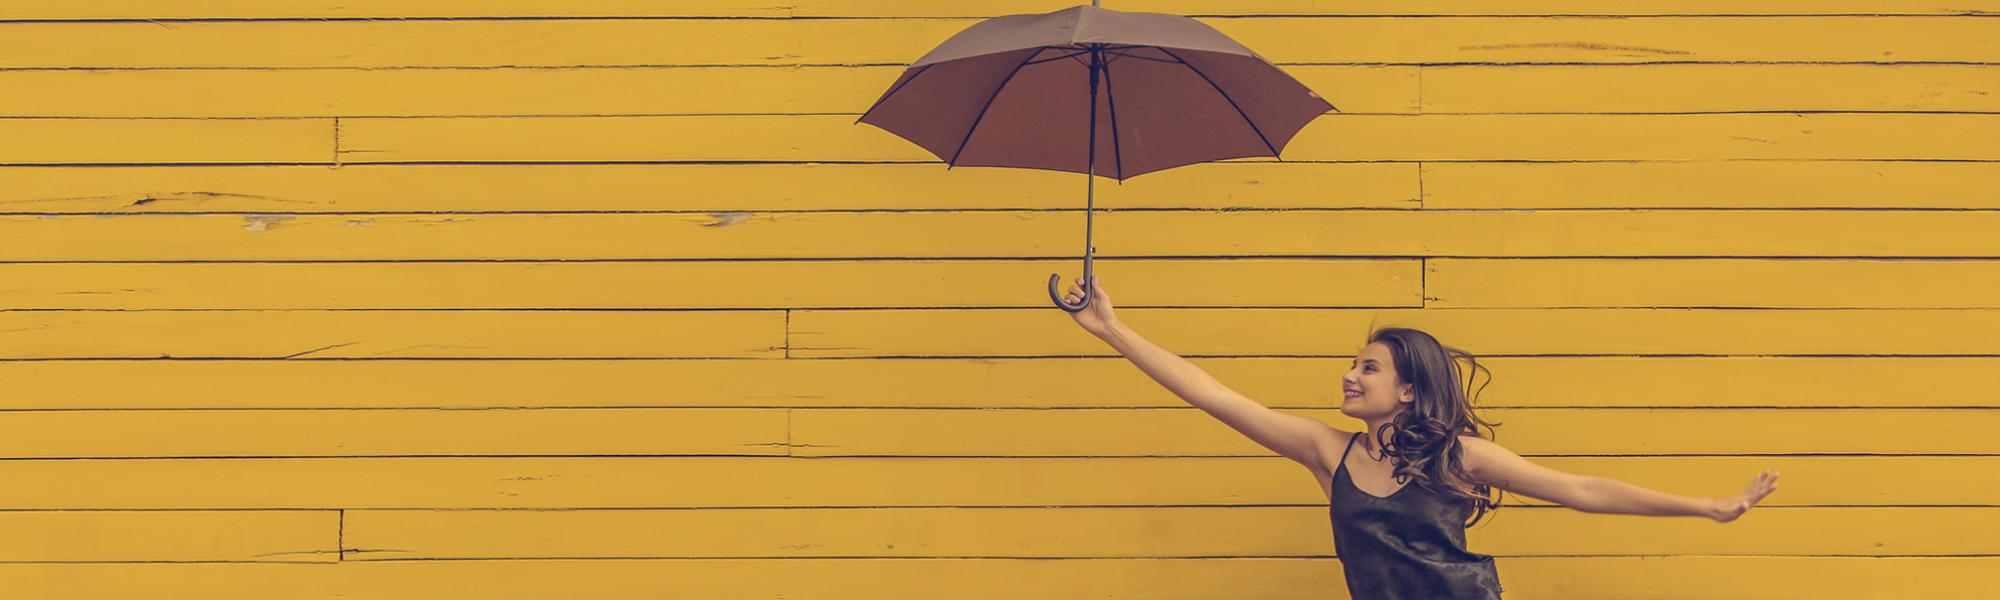 Photo of young woman in front of a bright yellow wall. She is holding an umbrella and looks like she may be blown away in flight!